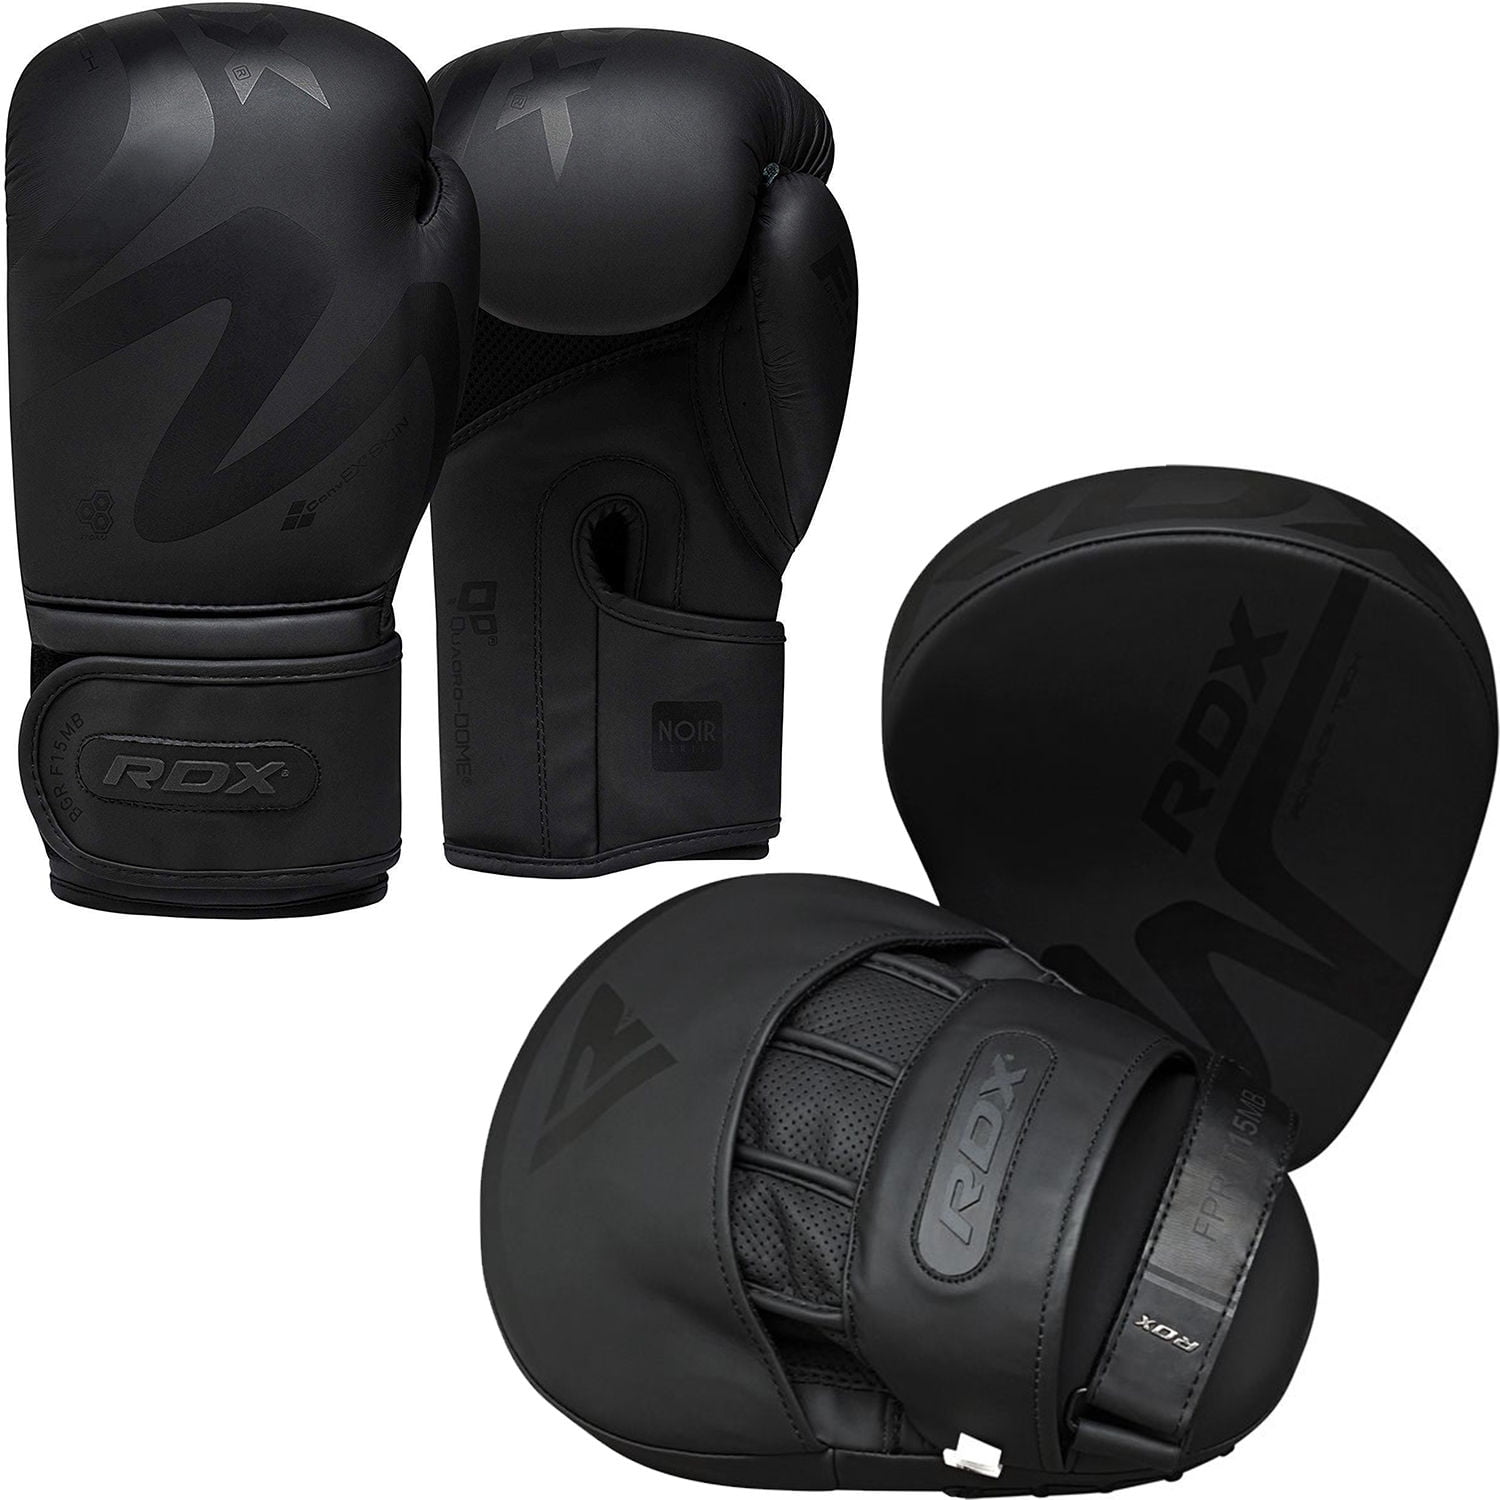 LACE UP BOXING GLOVES BAG PAD PUNCH UFC INSPIRED BY GRANT WINNING LEATHER MITTS 